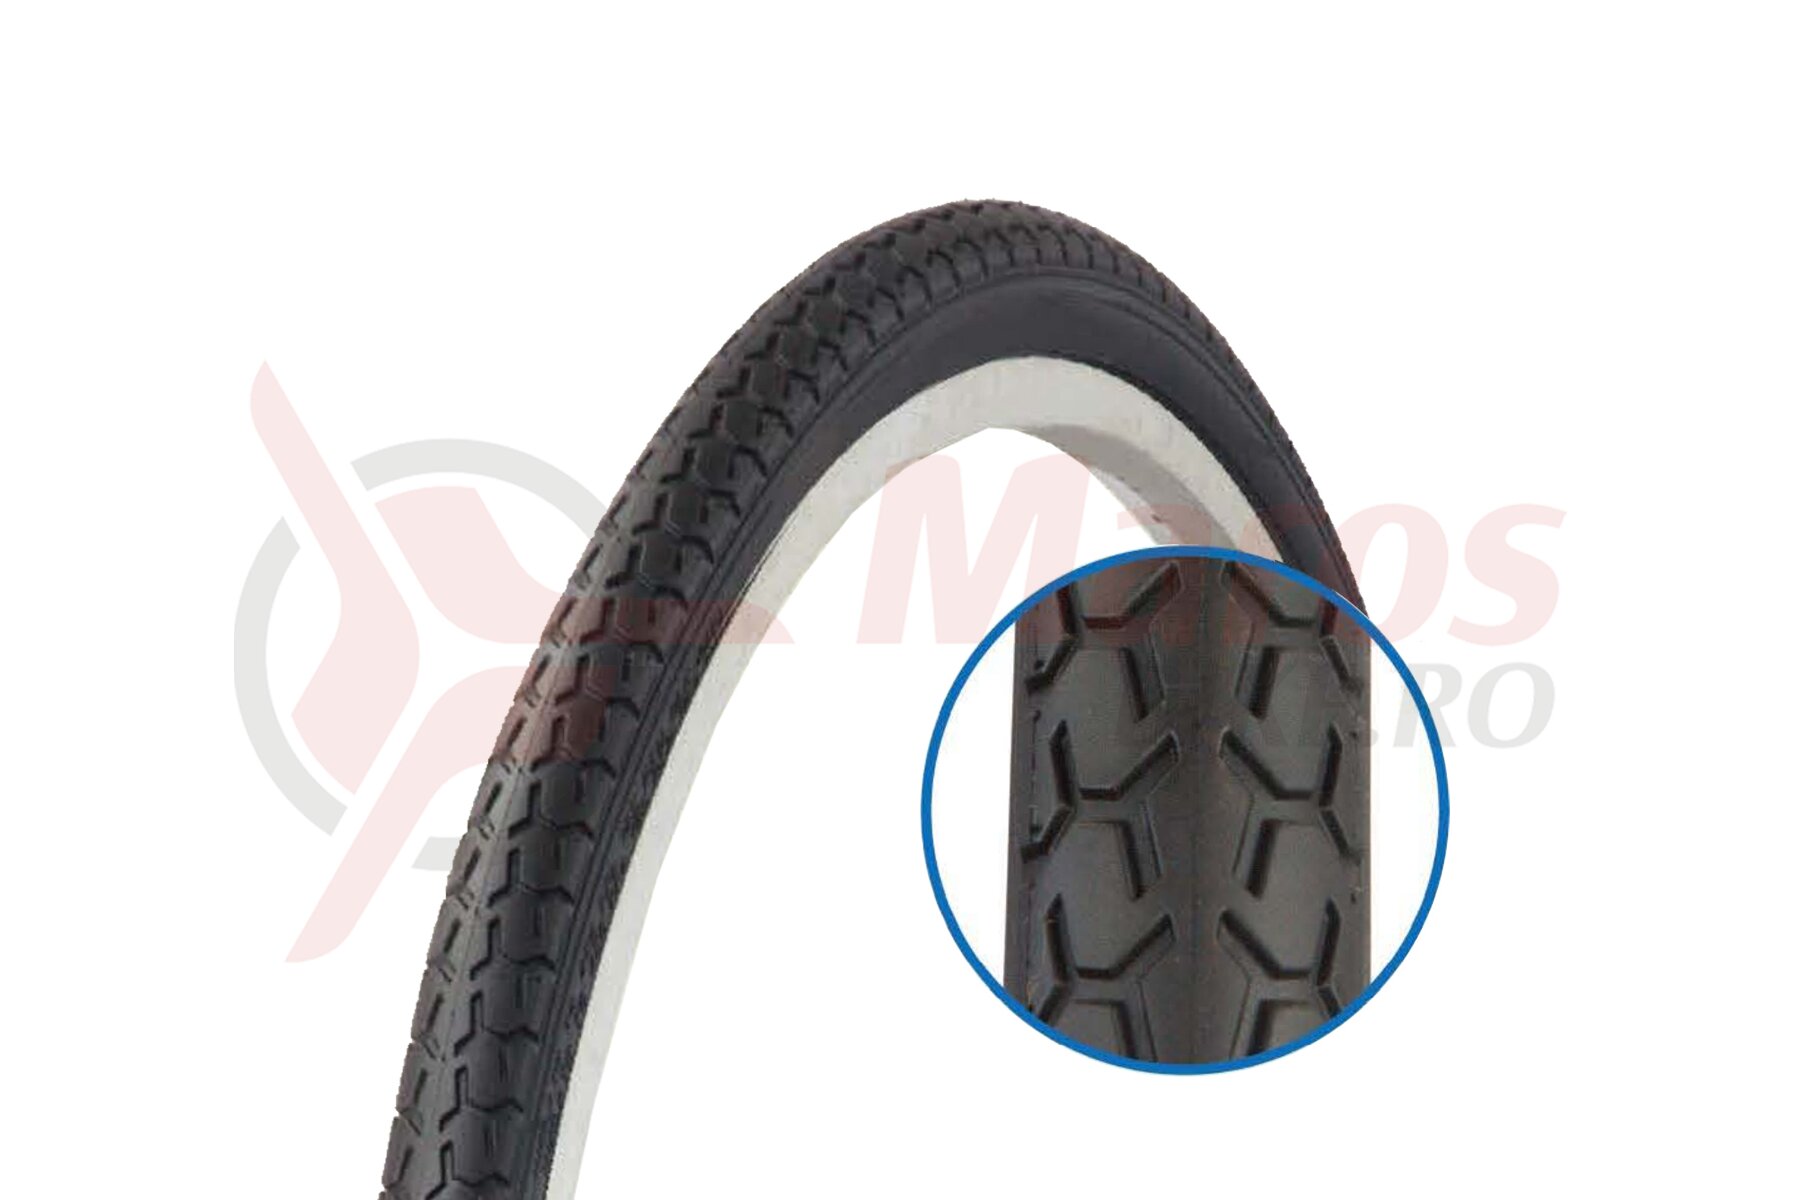 Boost Andes Variant Anvelopa Bicicleta Colinelli ZY-008 - 27 x 1-3/8 Inch, Negru